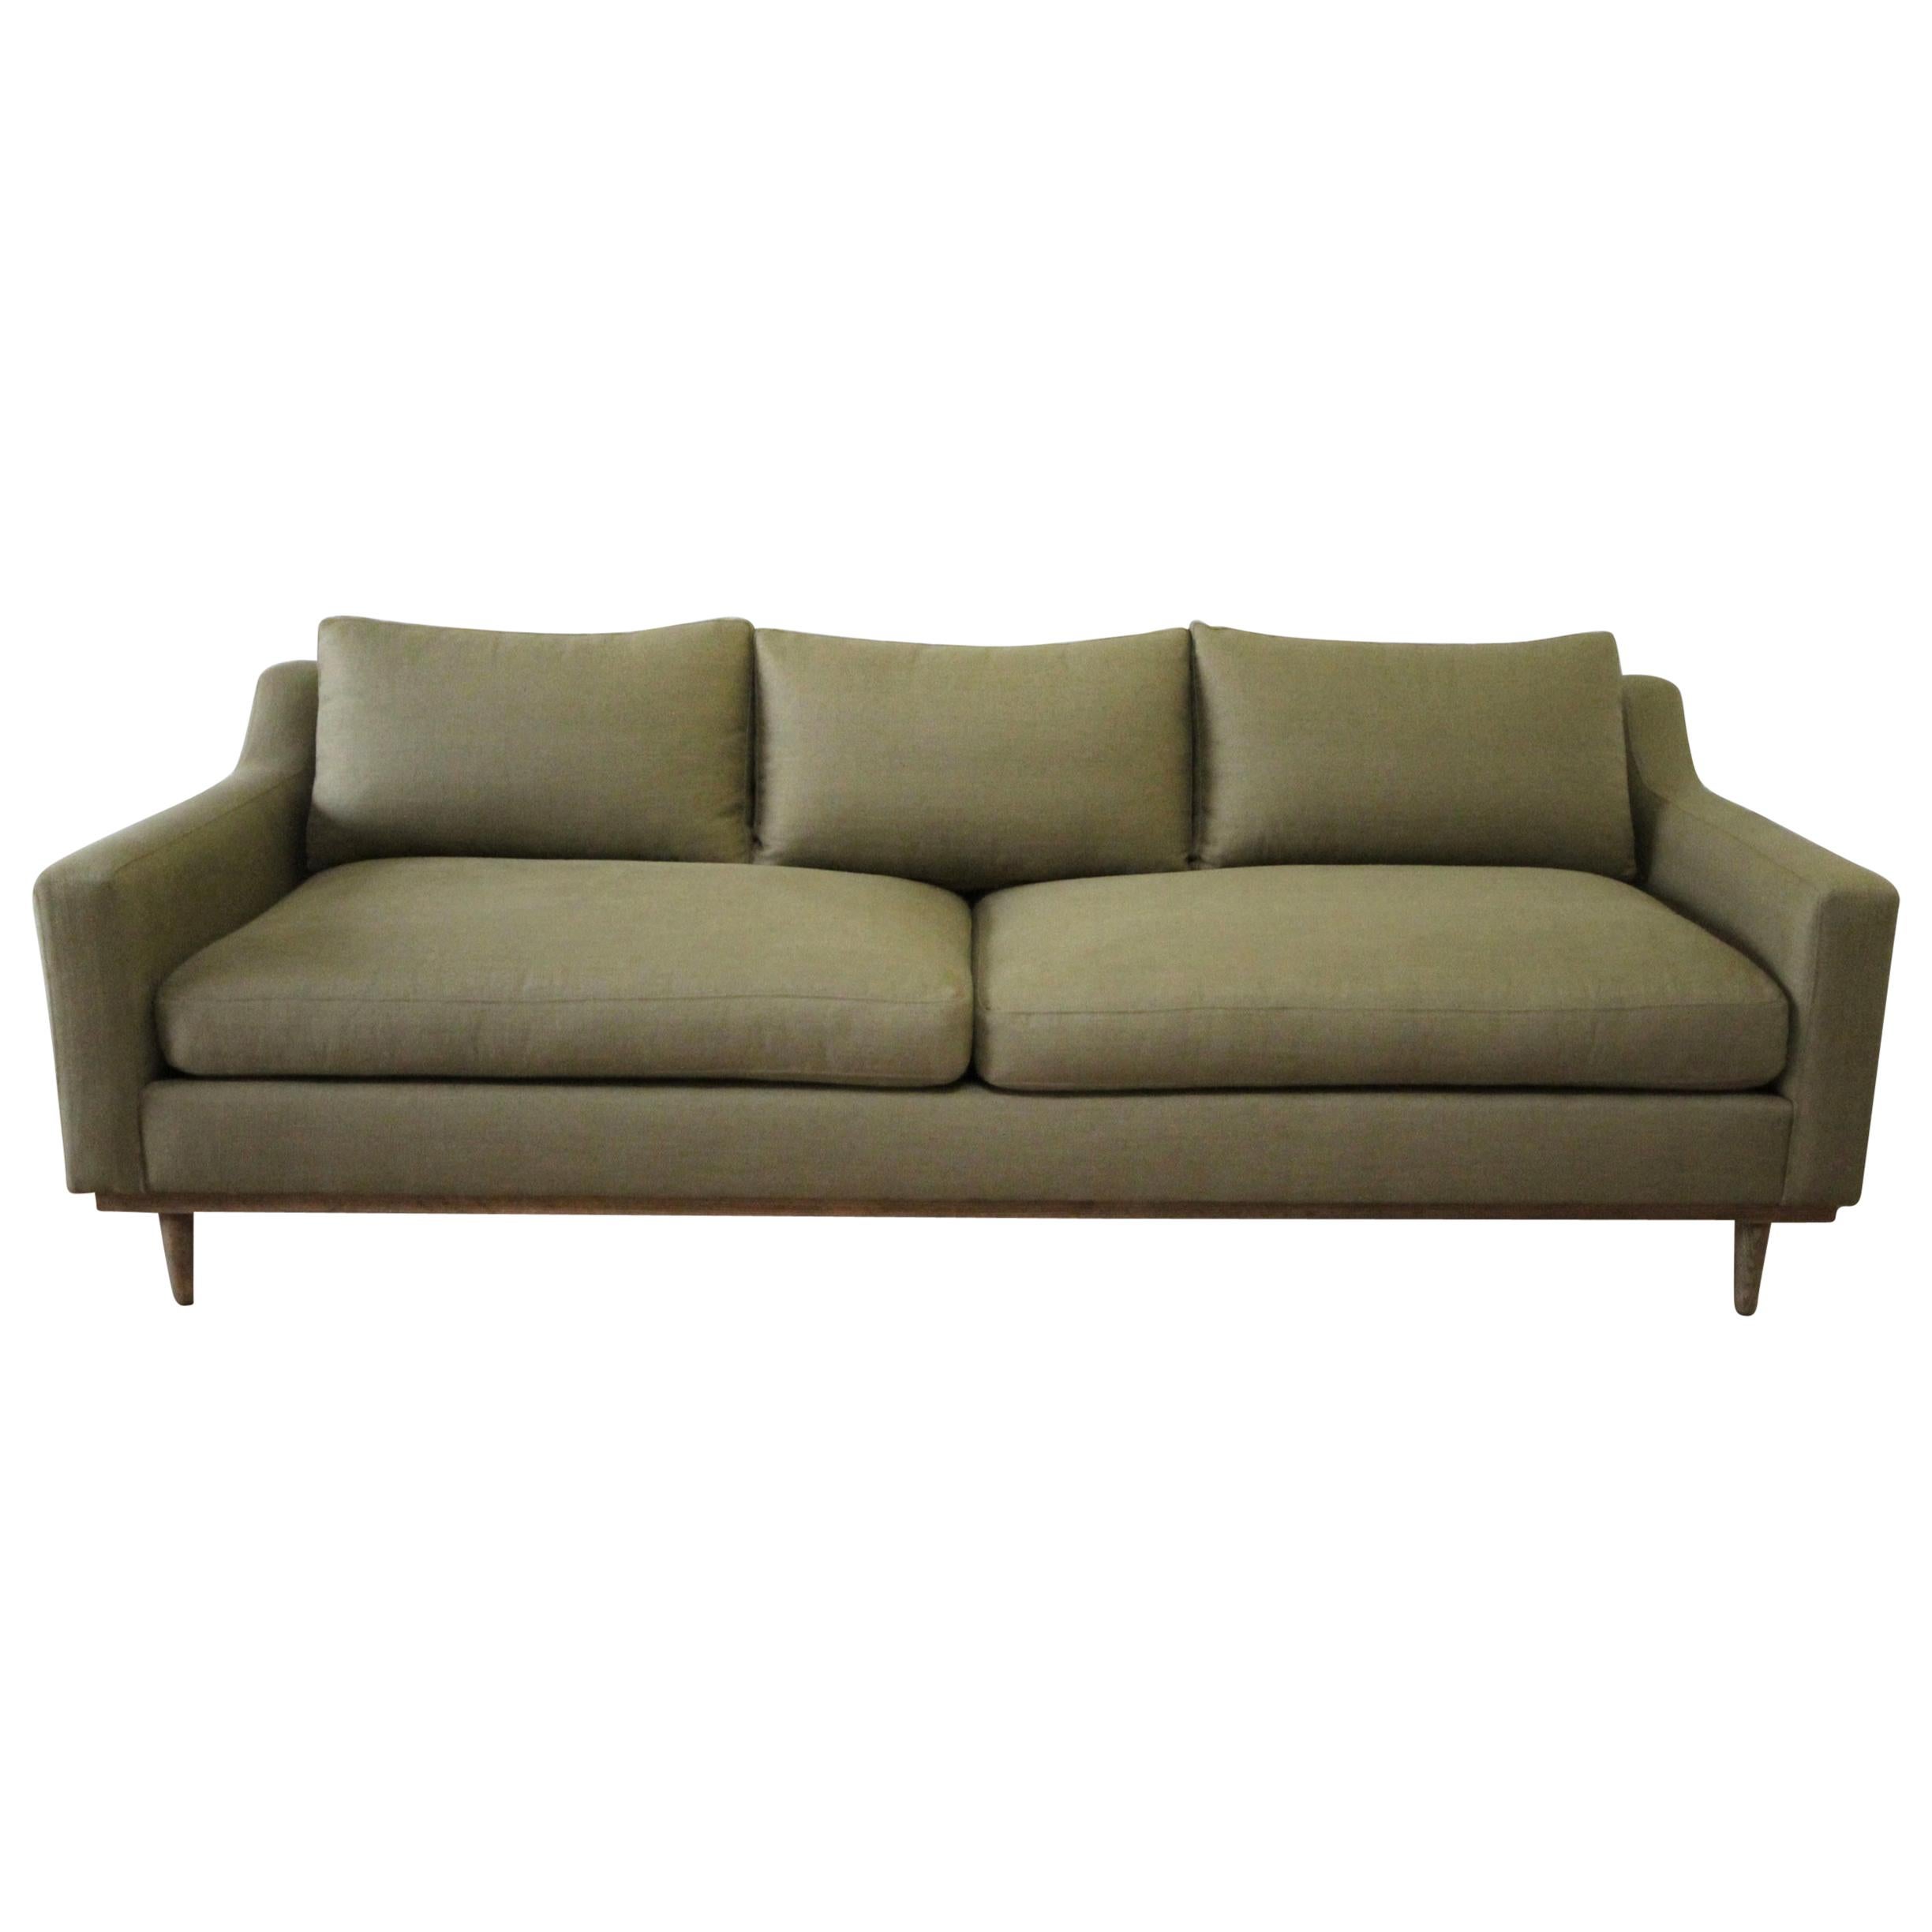 Vintage Modern Style Sofa with Down Cushions